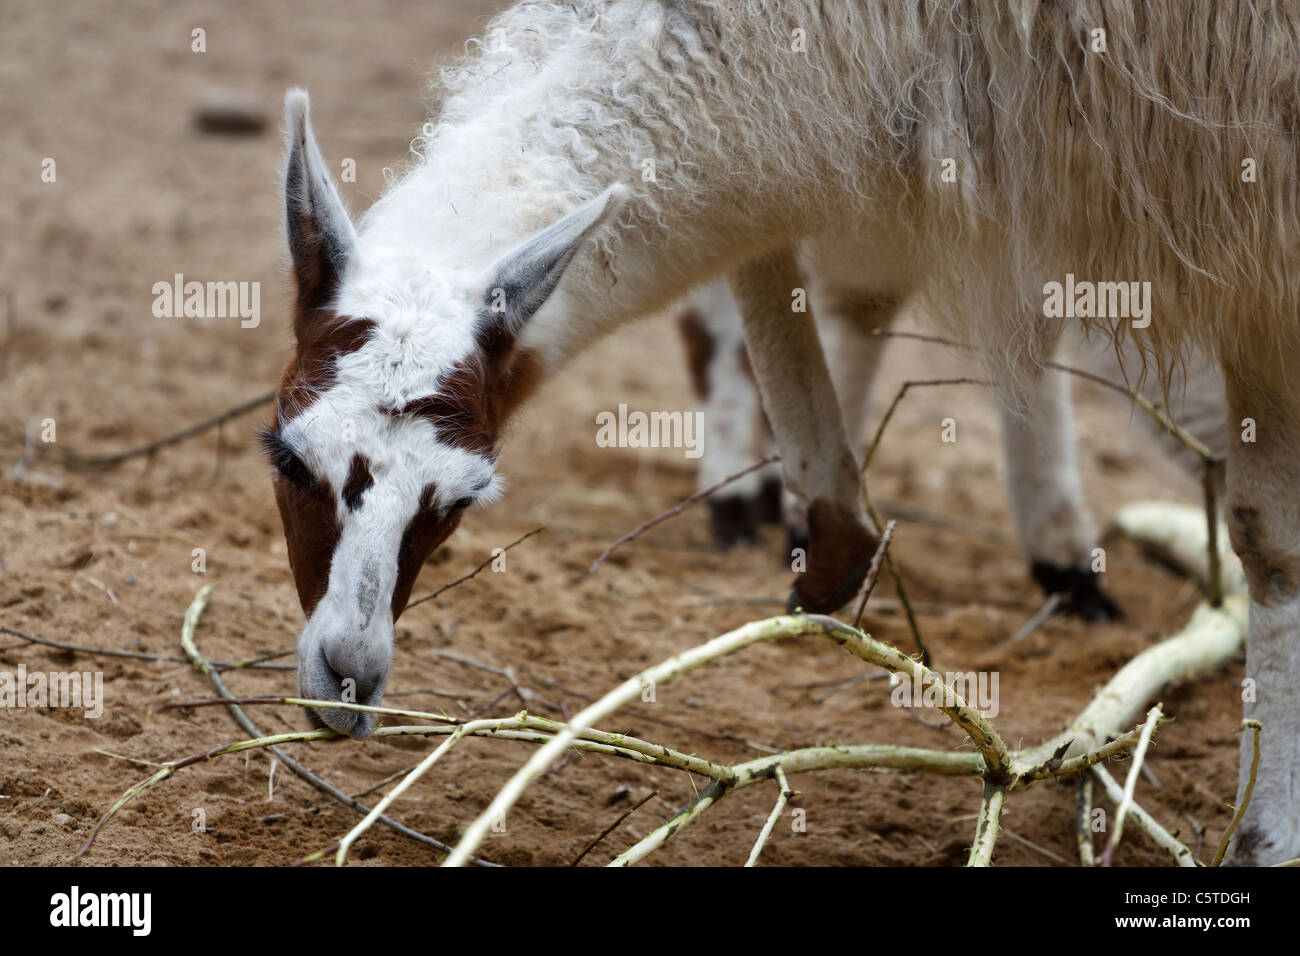 Outdoor image of a Camelid (Camelidae). Stock Photo